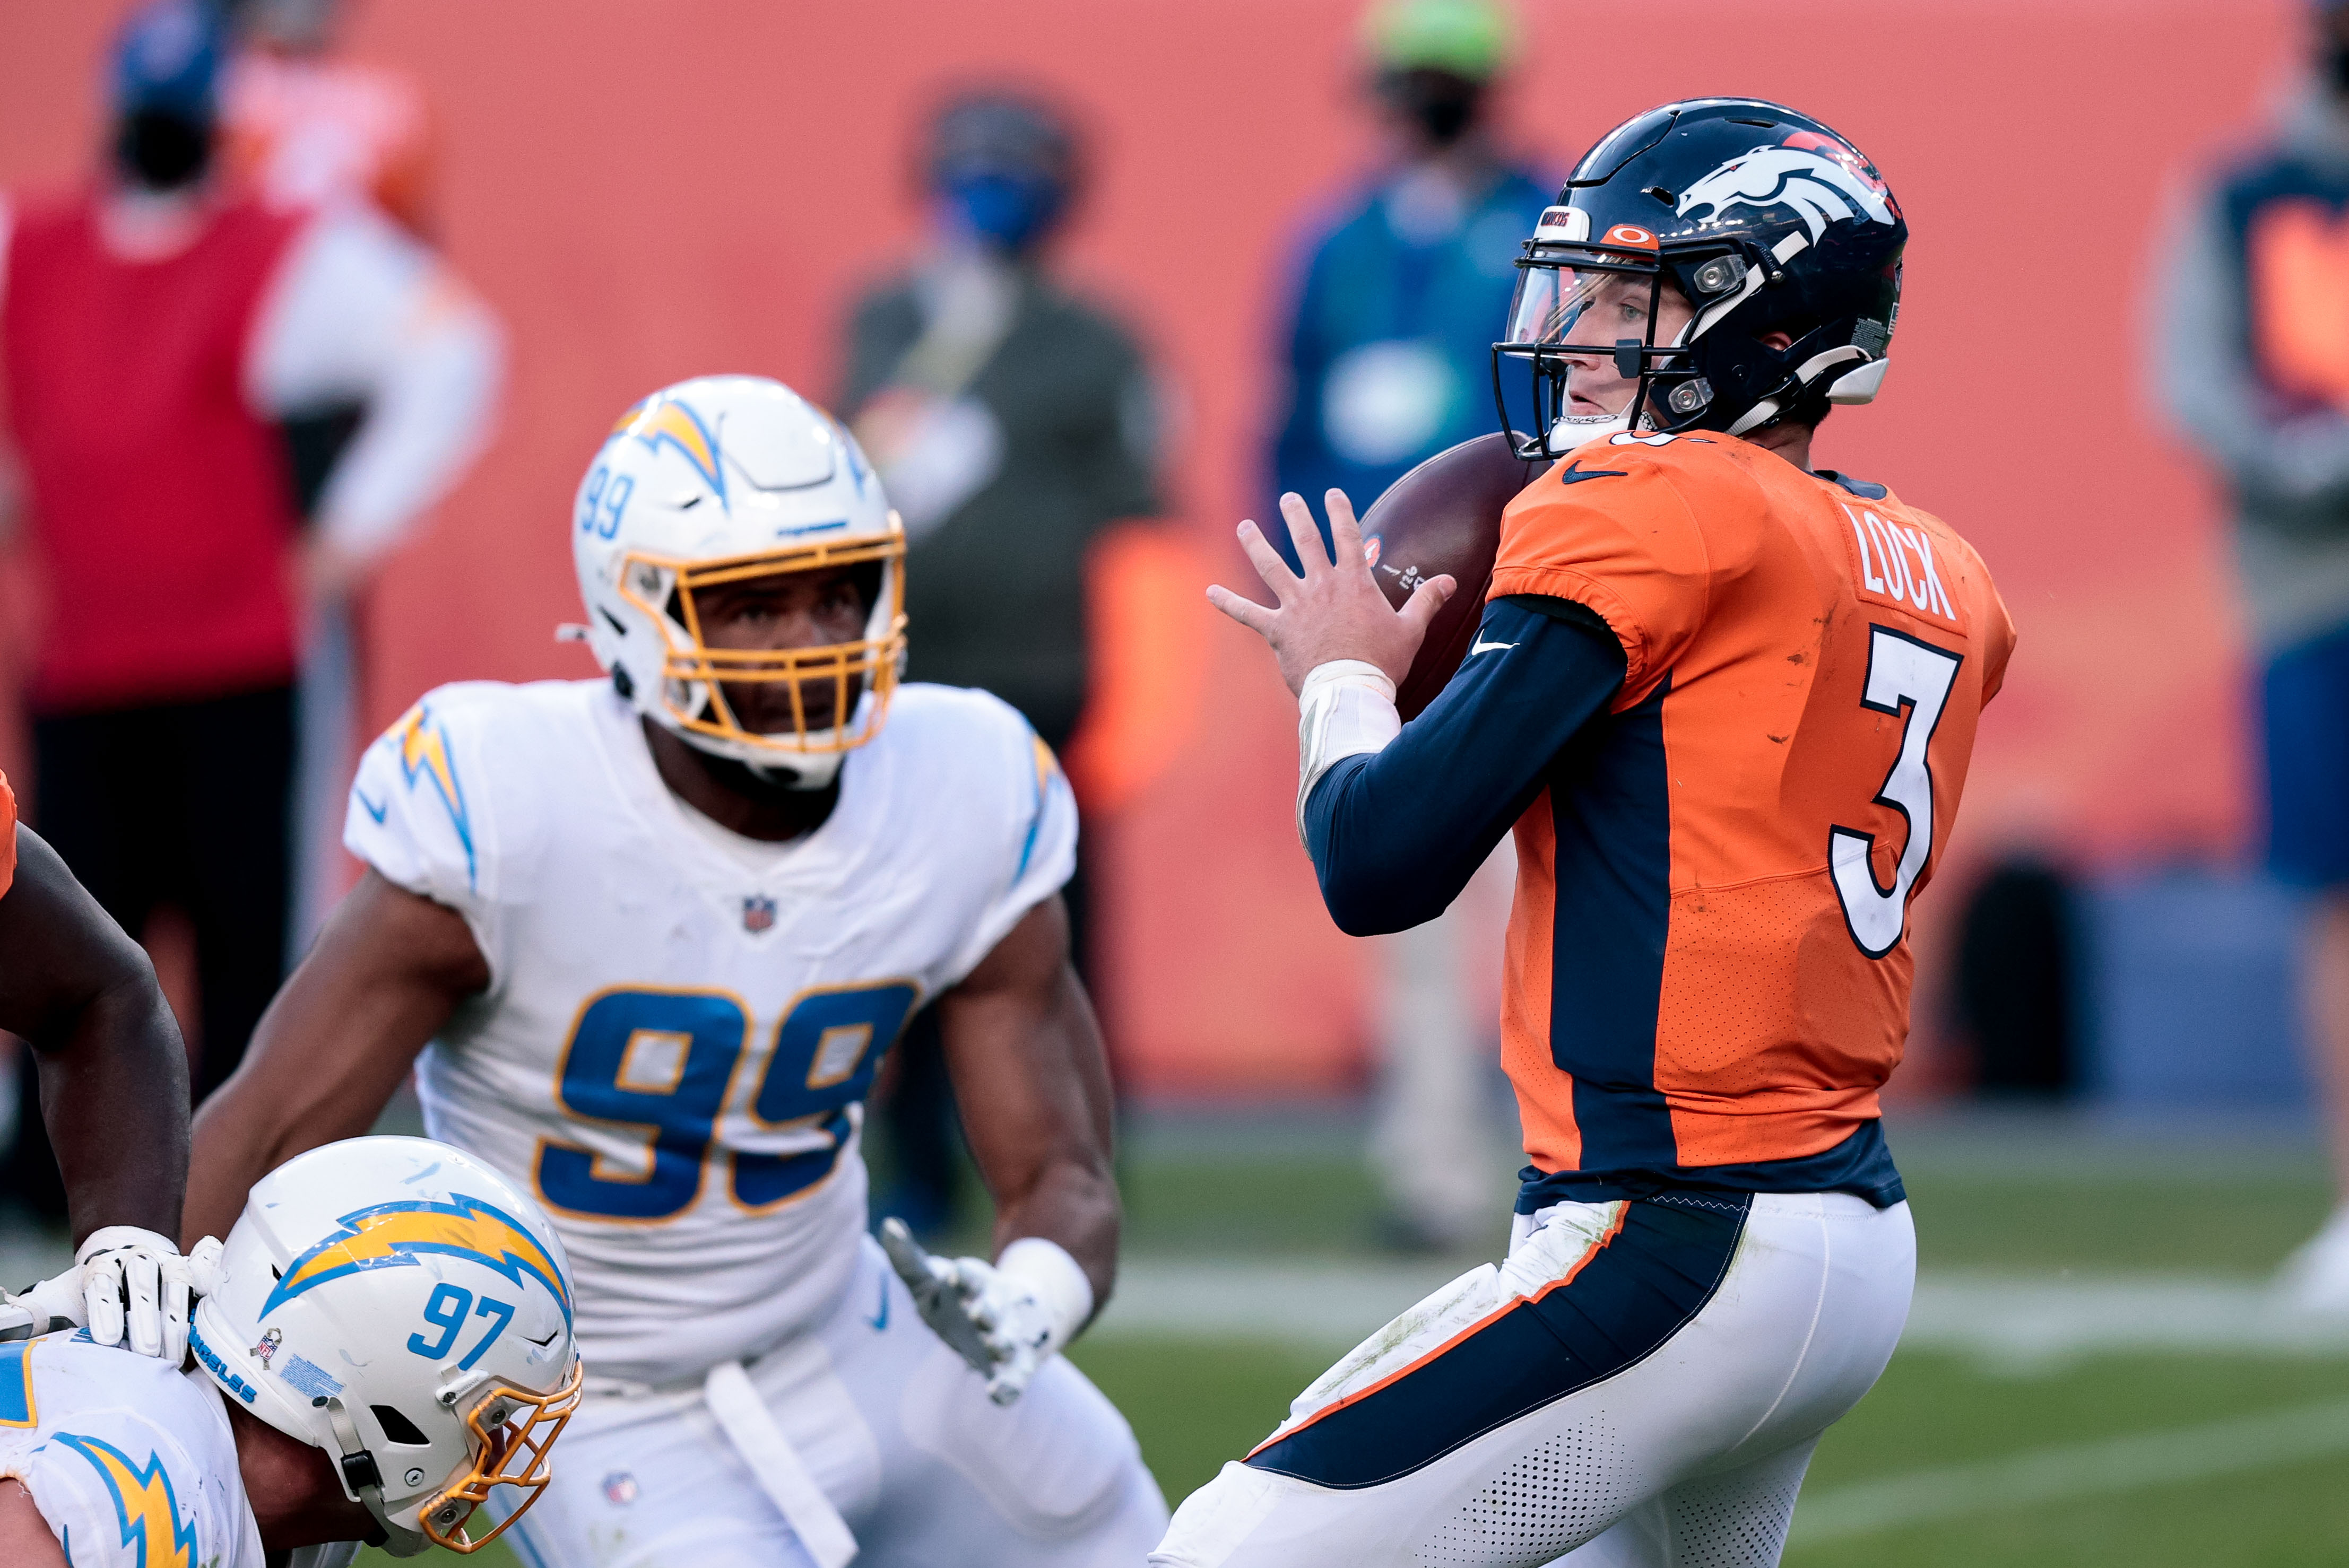 Denver Broncos quarterback Drew Lock (3) looks to pass under pressure from Los Angeles Chargers defensive tackle Jerry Tillery (99) in the third quarter at Empower Field at Mile High